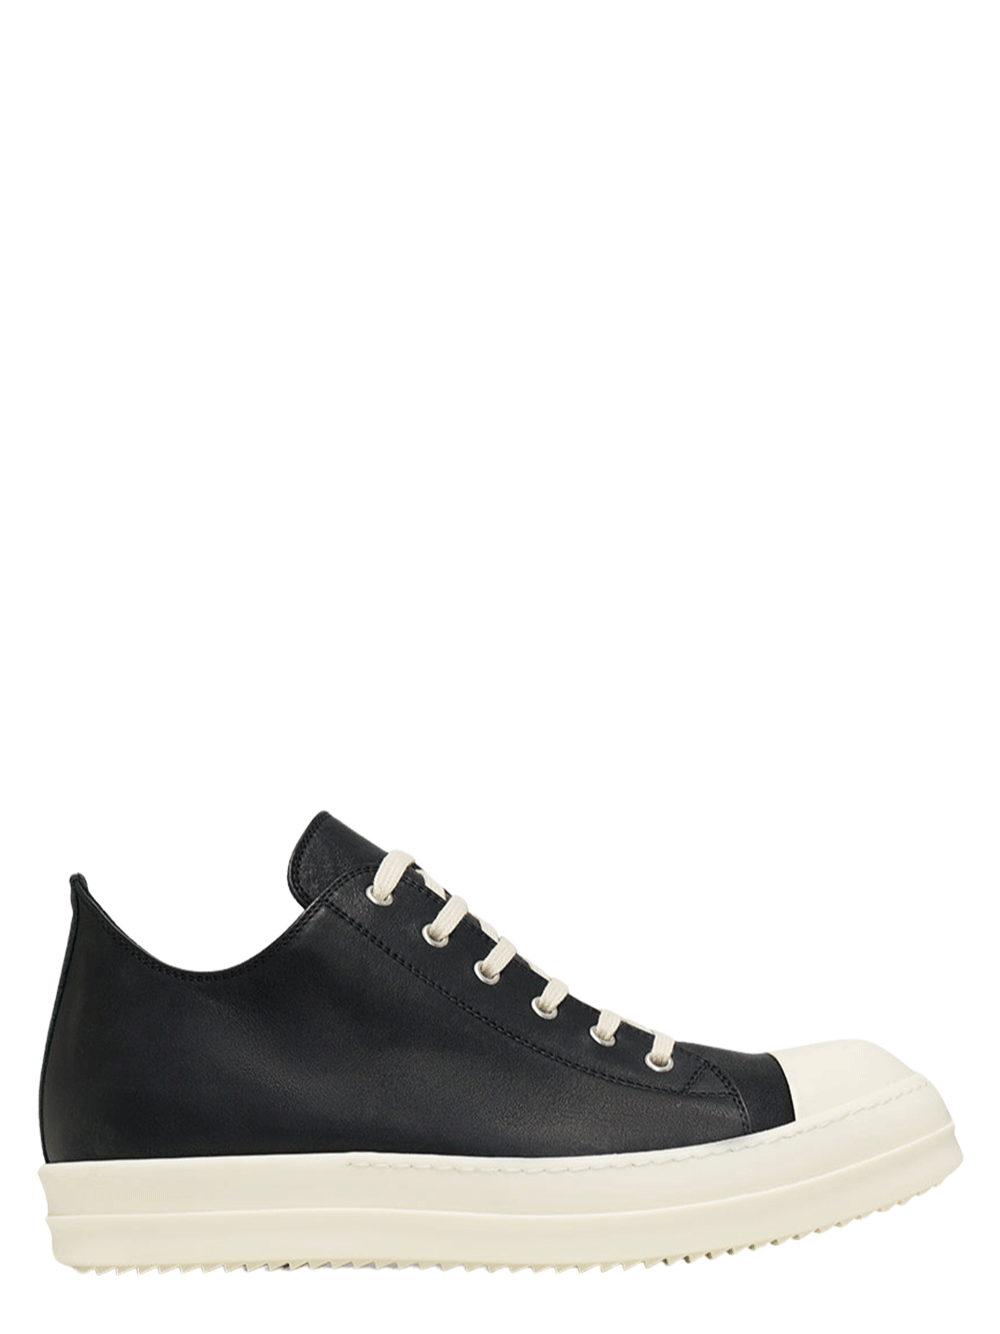 Rick-Owens-Low-Sneakers-Washed-Calf-Black-1